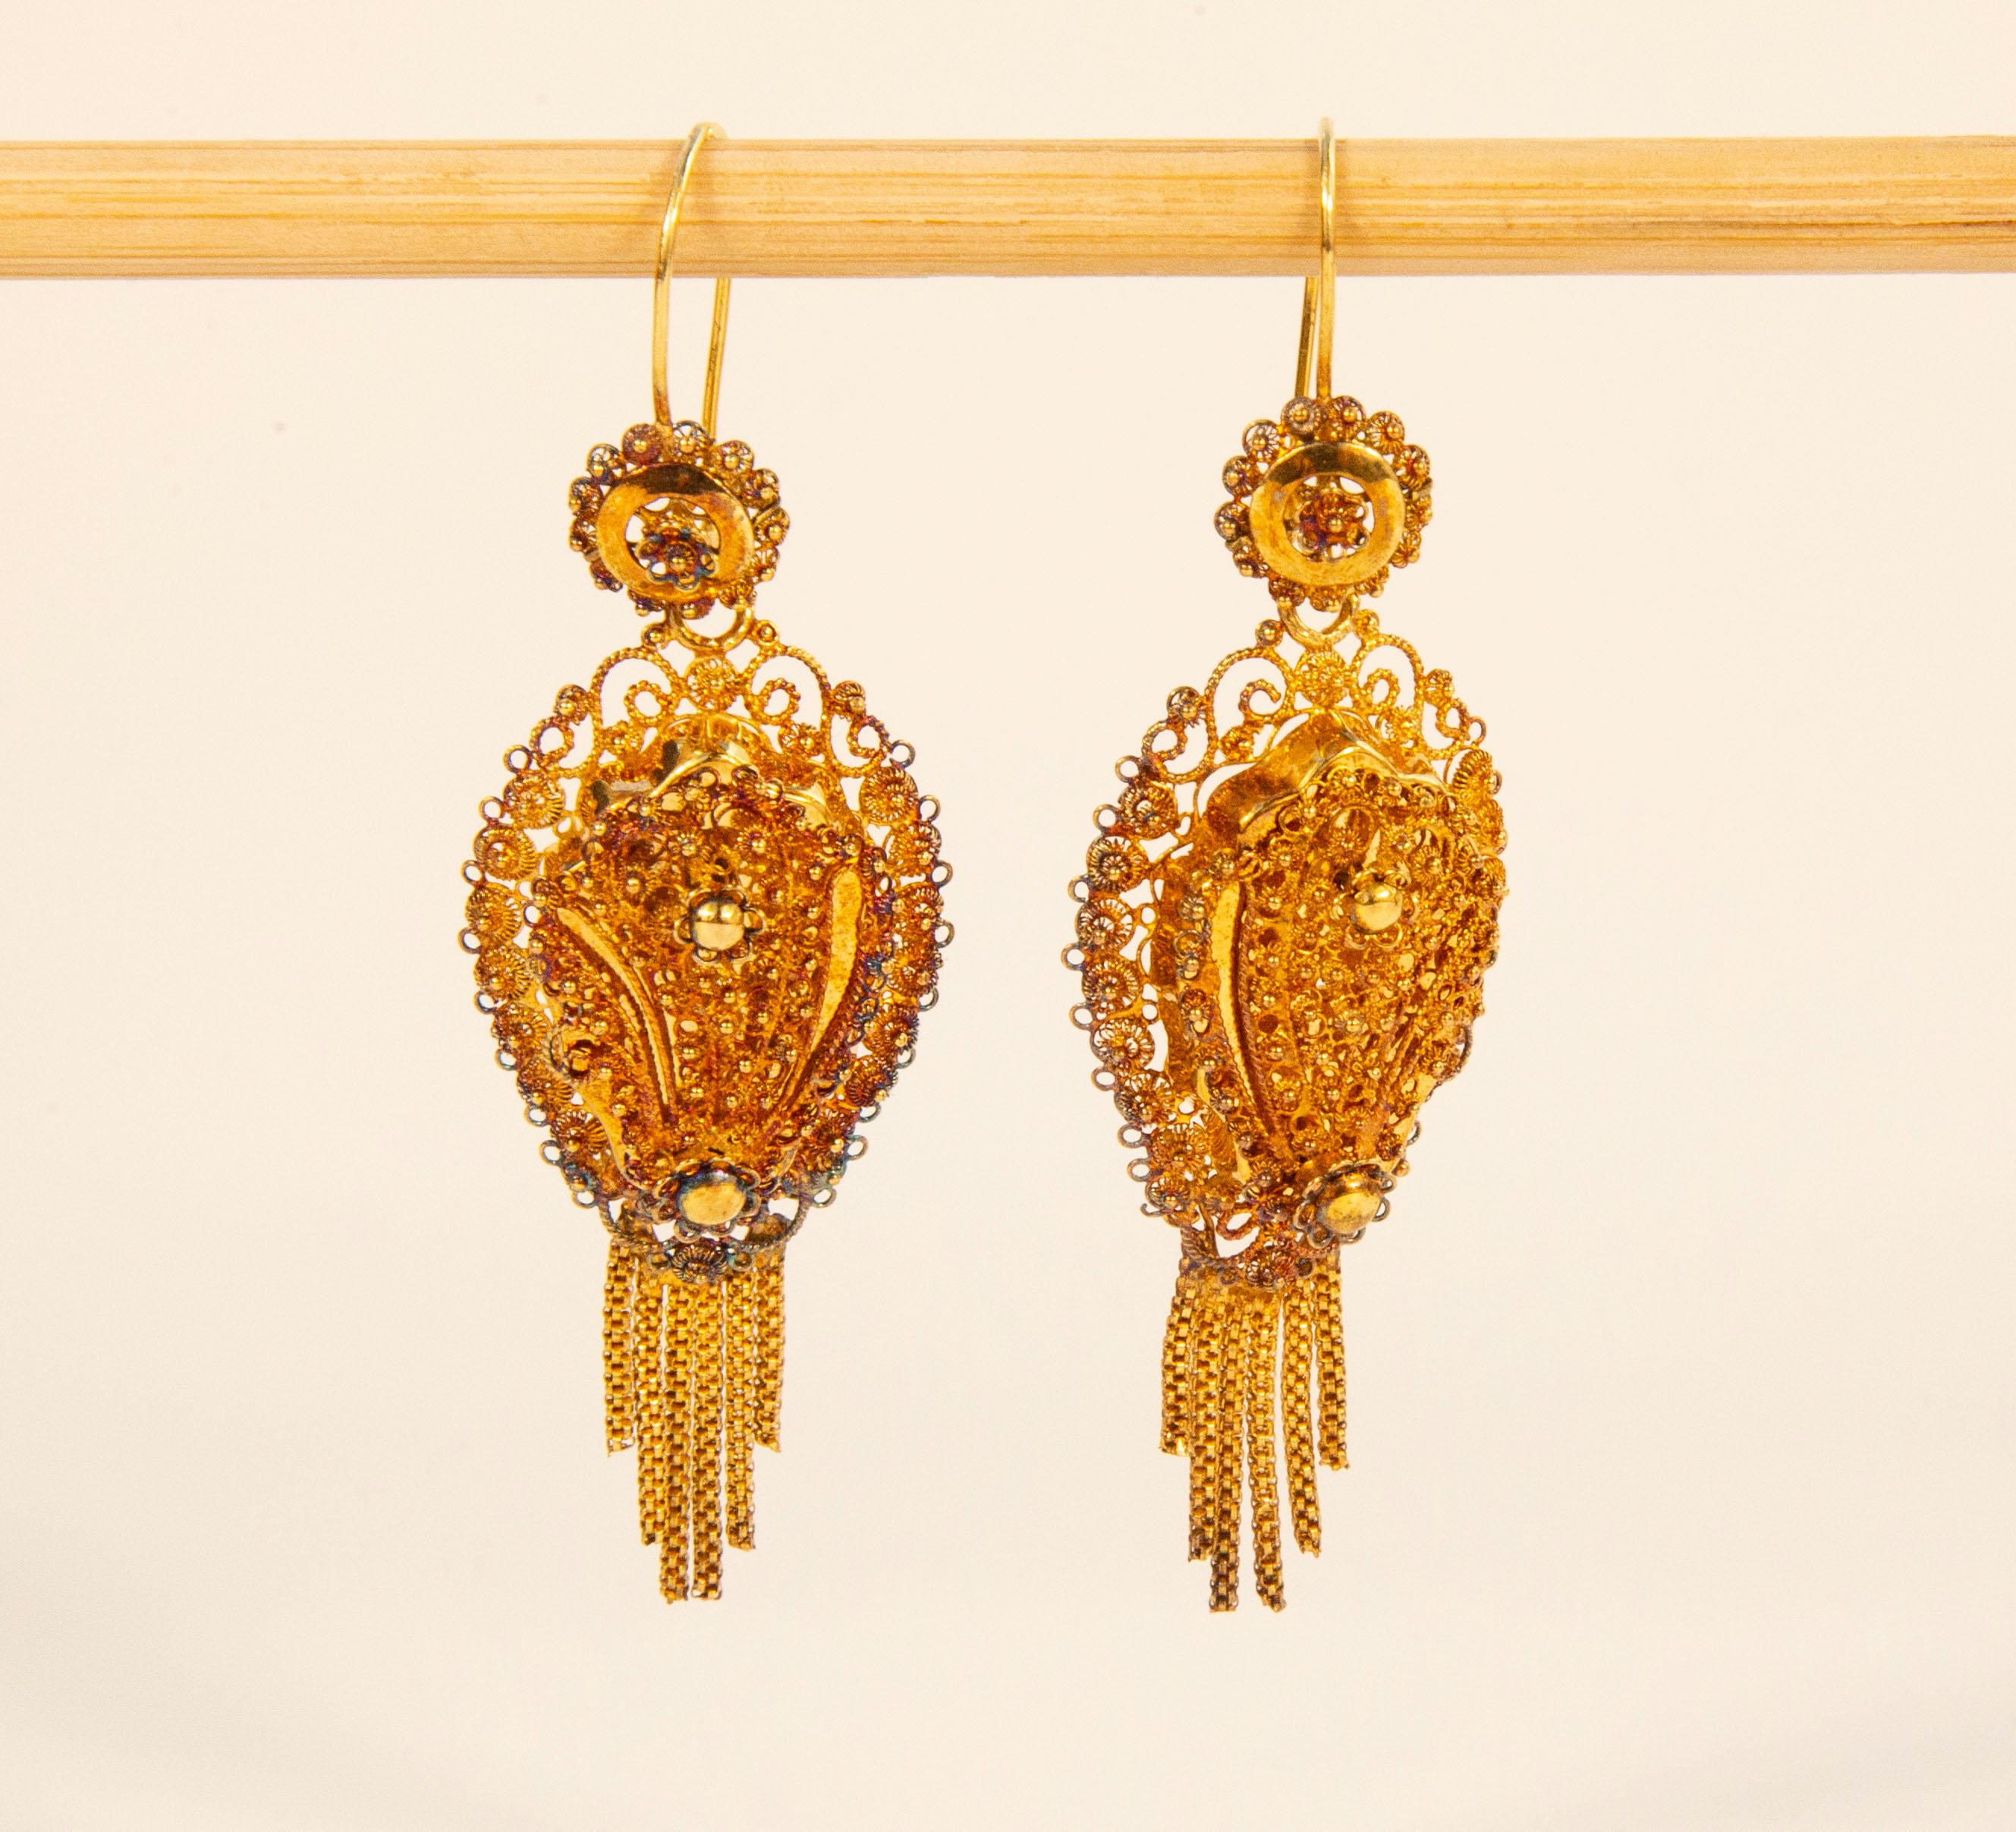 Antique Dutch 14 karat yellow gold dangle earrings made with filigree technique. The filigree technique is a very refined method that uses a thin golden thread to form a lace-like pattern and fine embroidery. Each item features very sophisticated